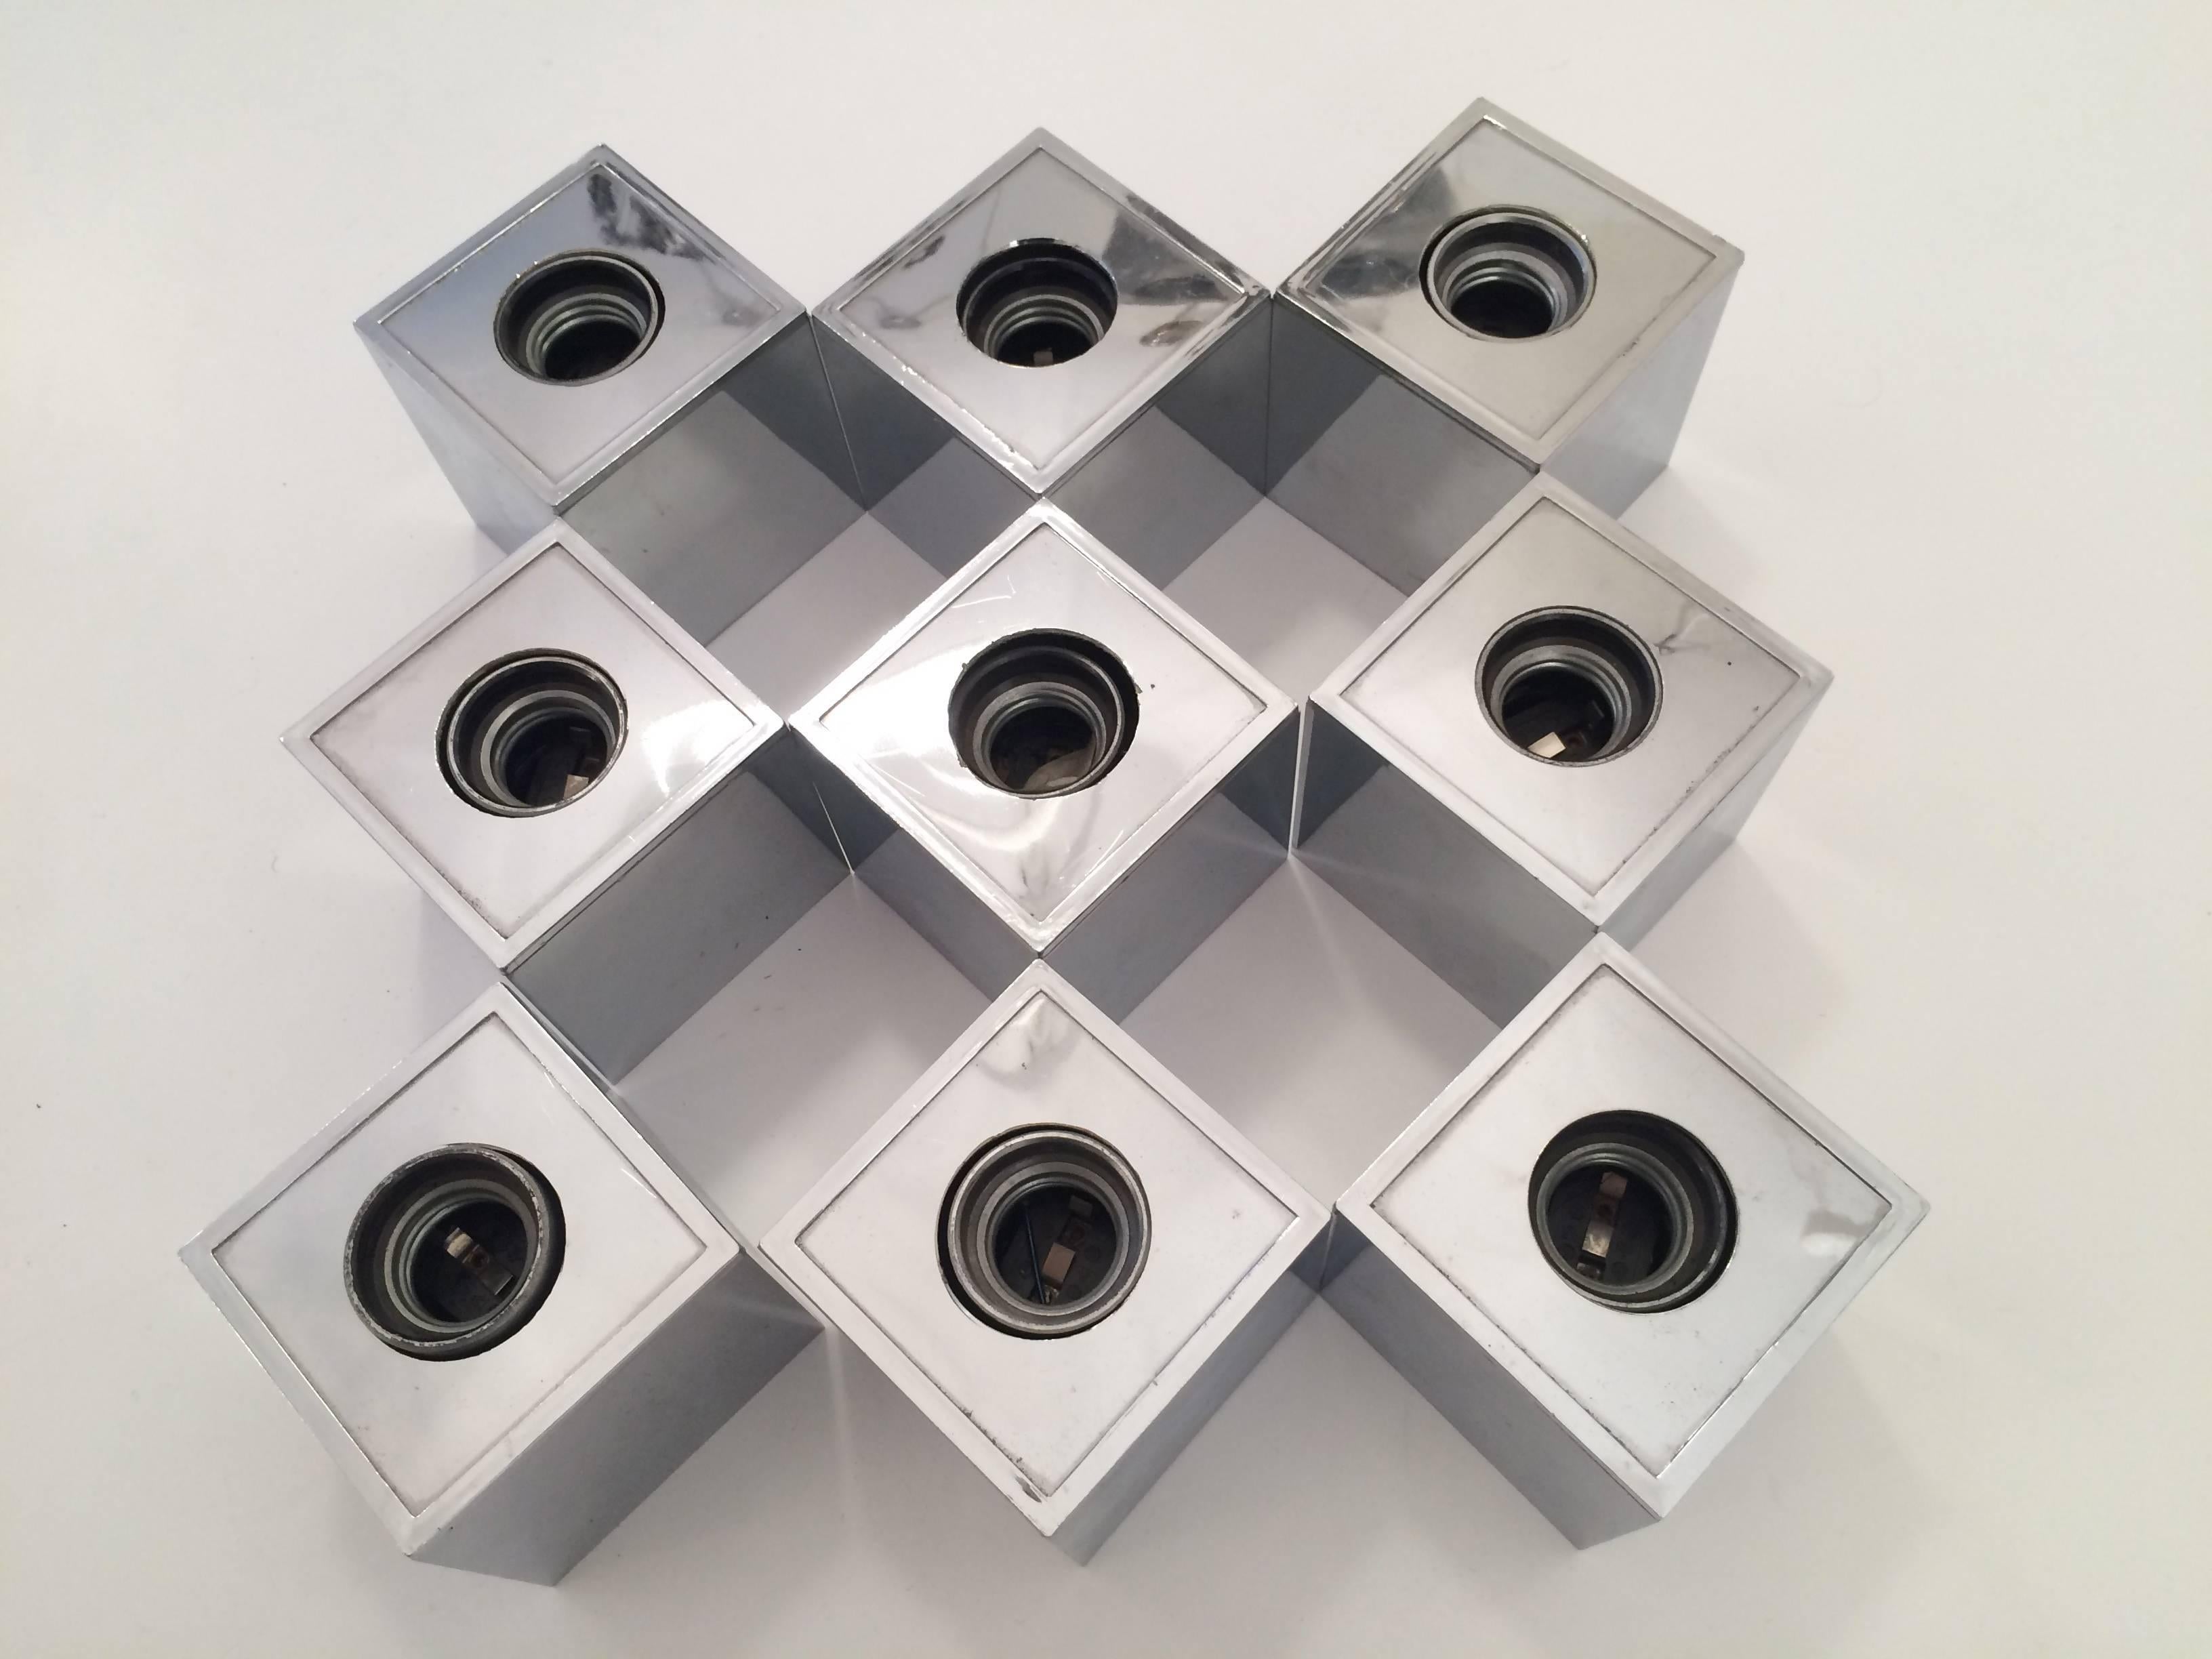 Set of 11 vintage Italian modular chrome cube light.
Can be used as a wall lamp or a ceiling lamp.
Very easy to install.